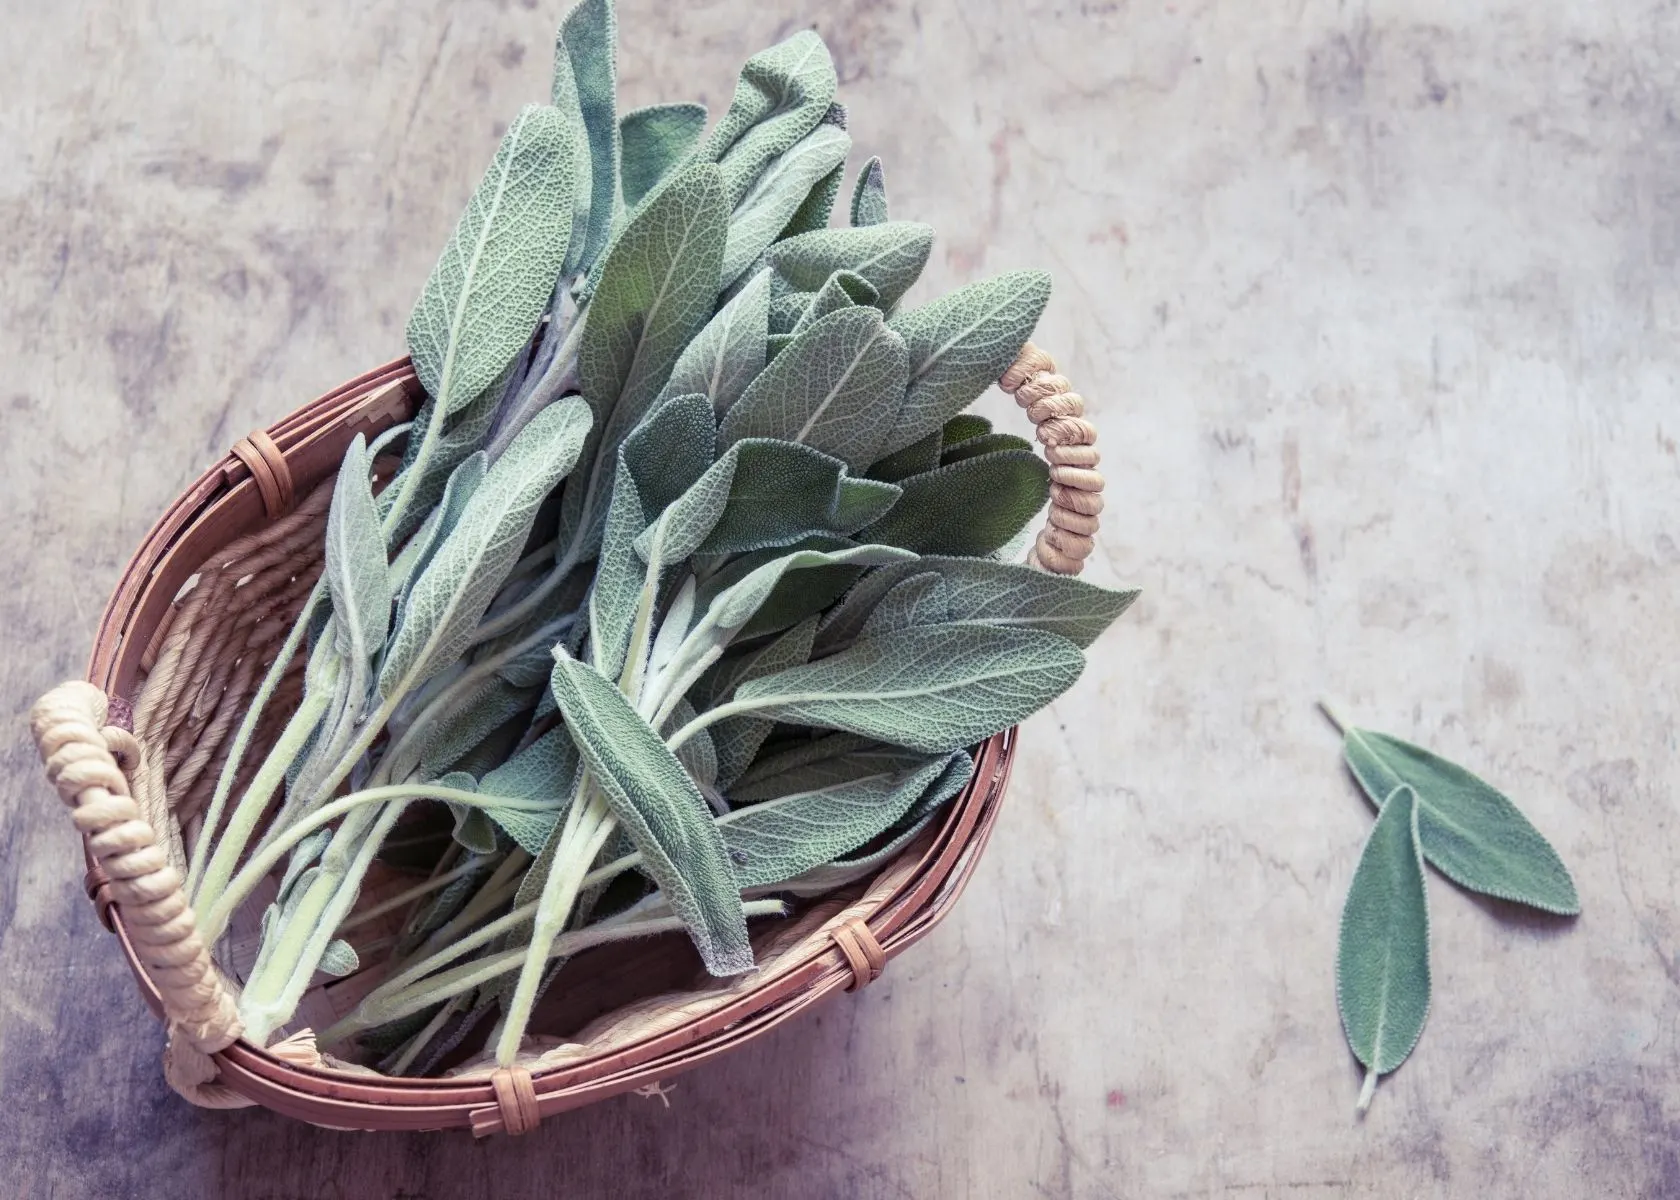 Leaves of fresh sage in rustic whicker basket on gray patterned table.